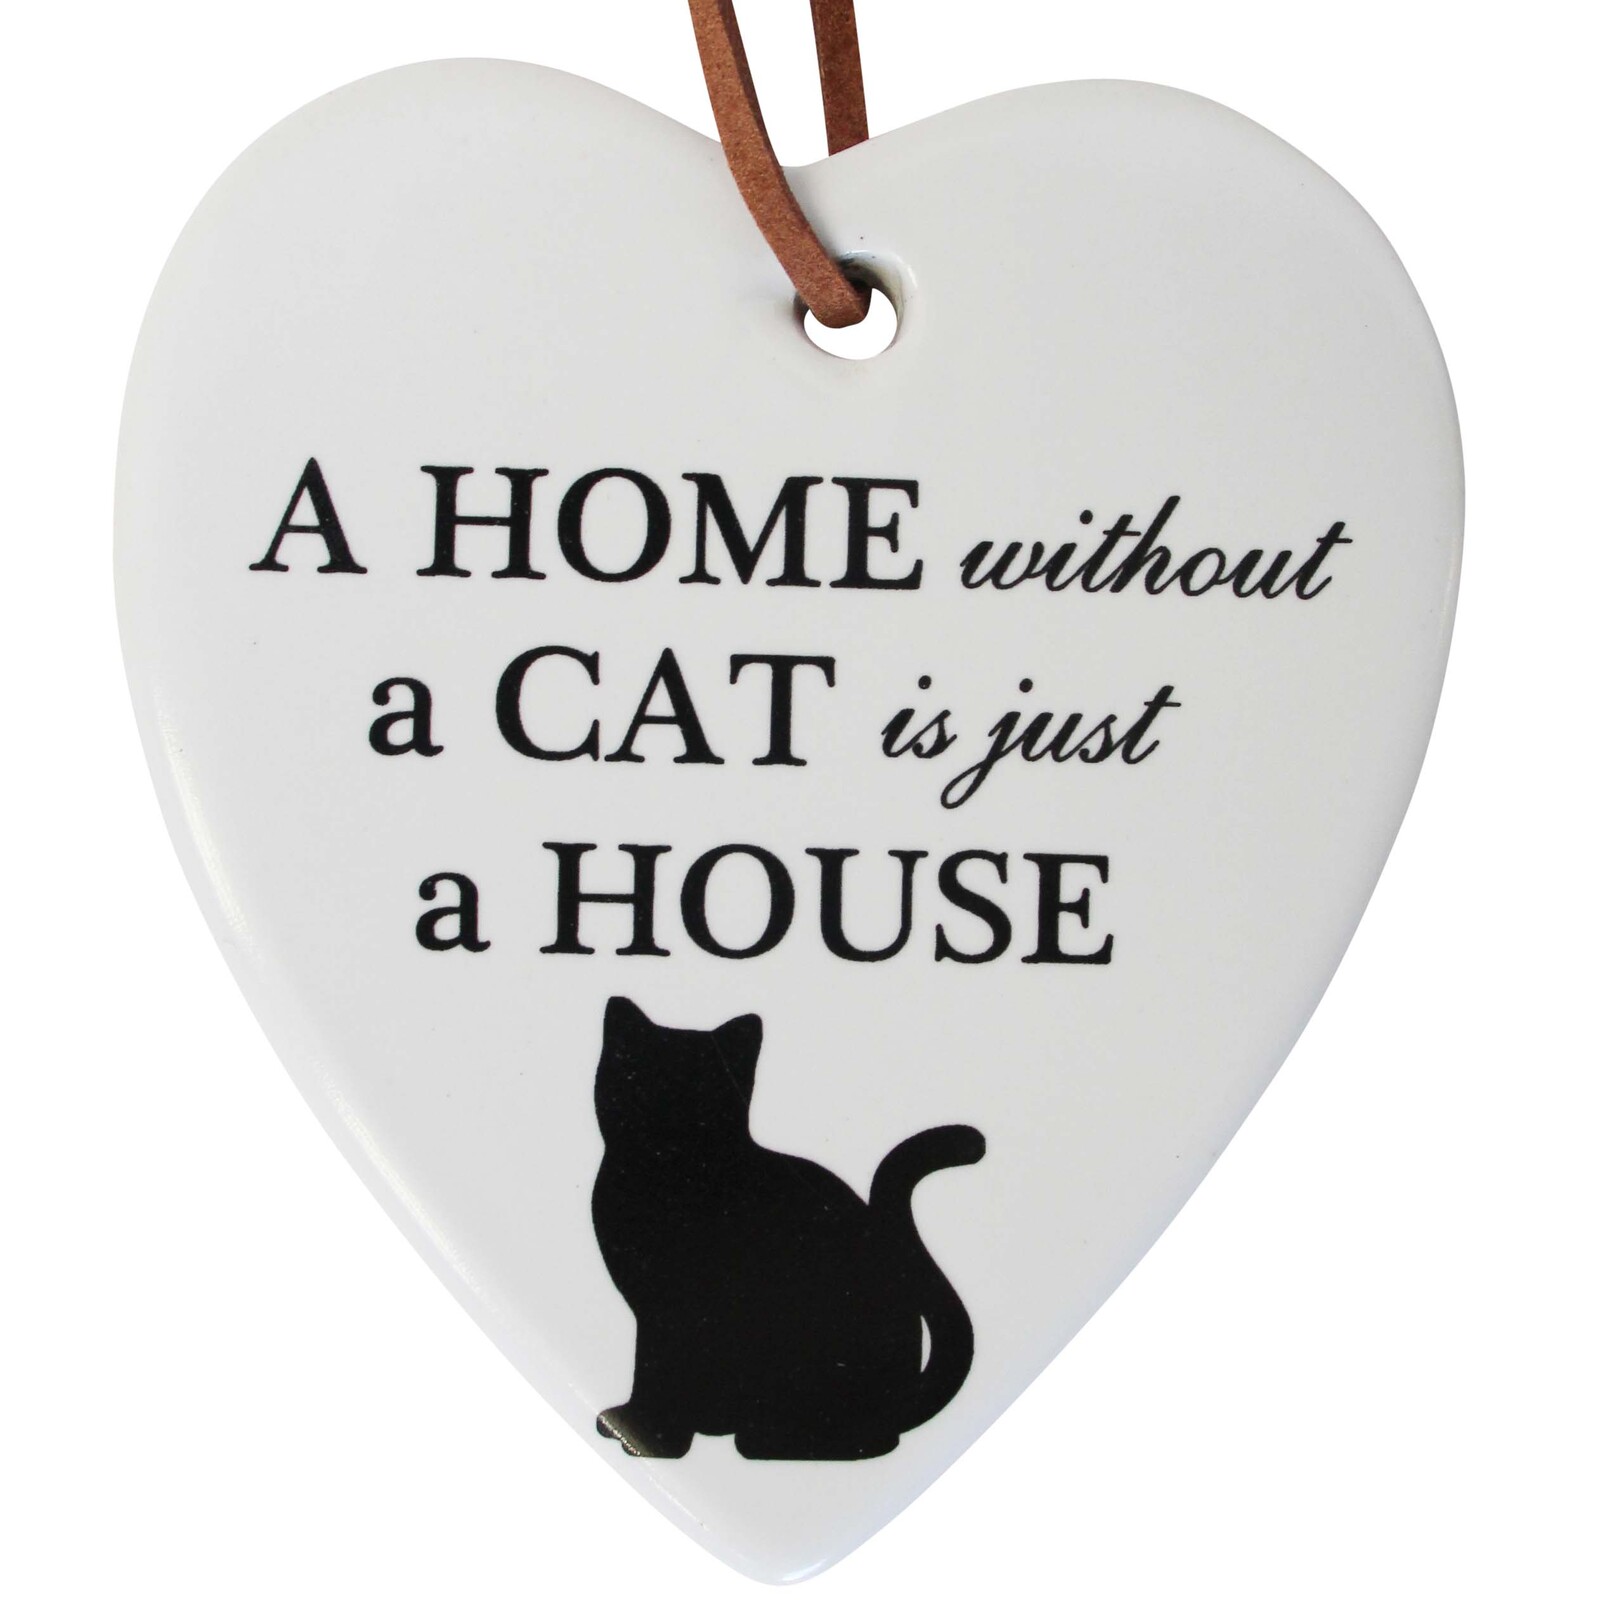 Hanging Heart Cat Home